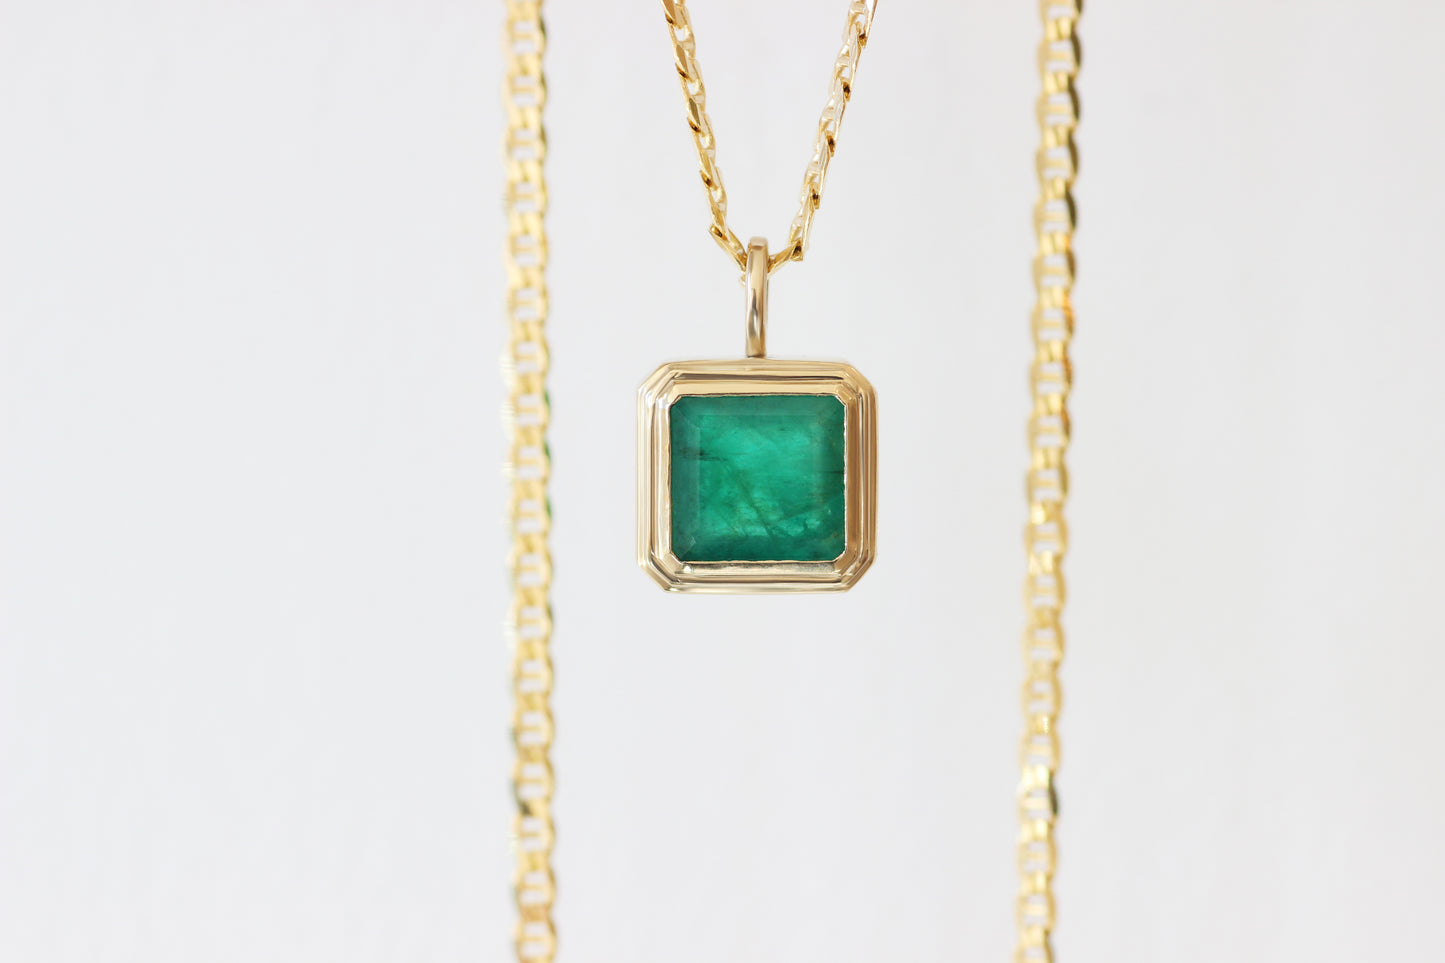 Custom pendant with client's own emerald cut emerald soft step bezel set in client's own recycled gold